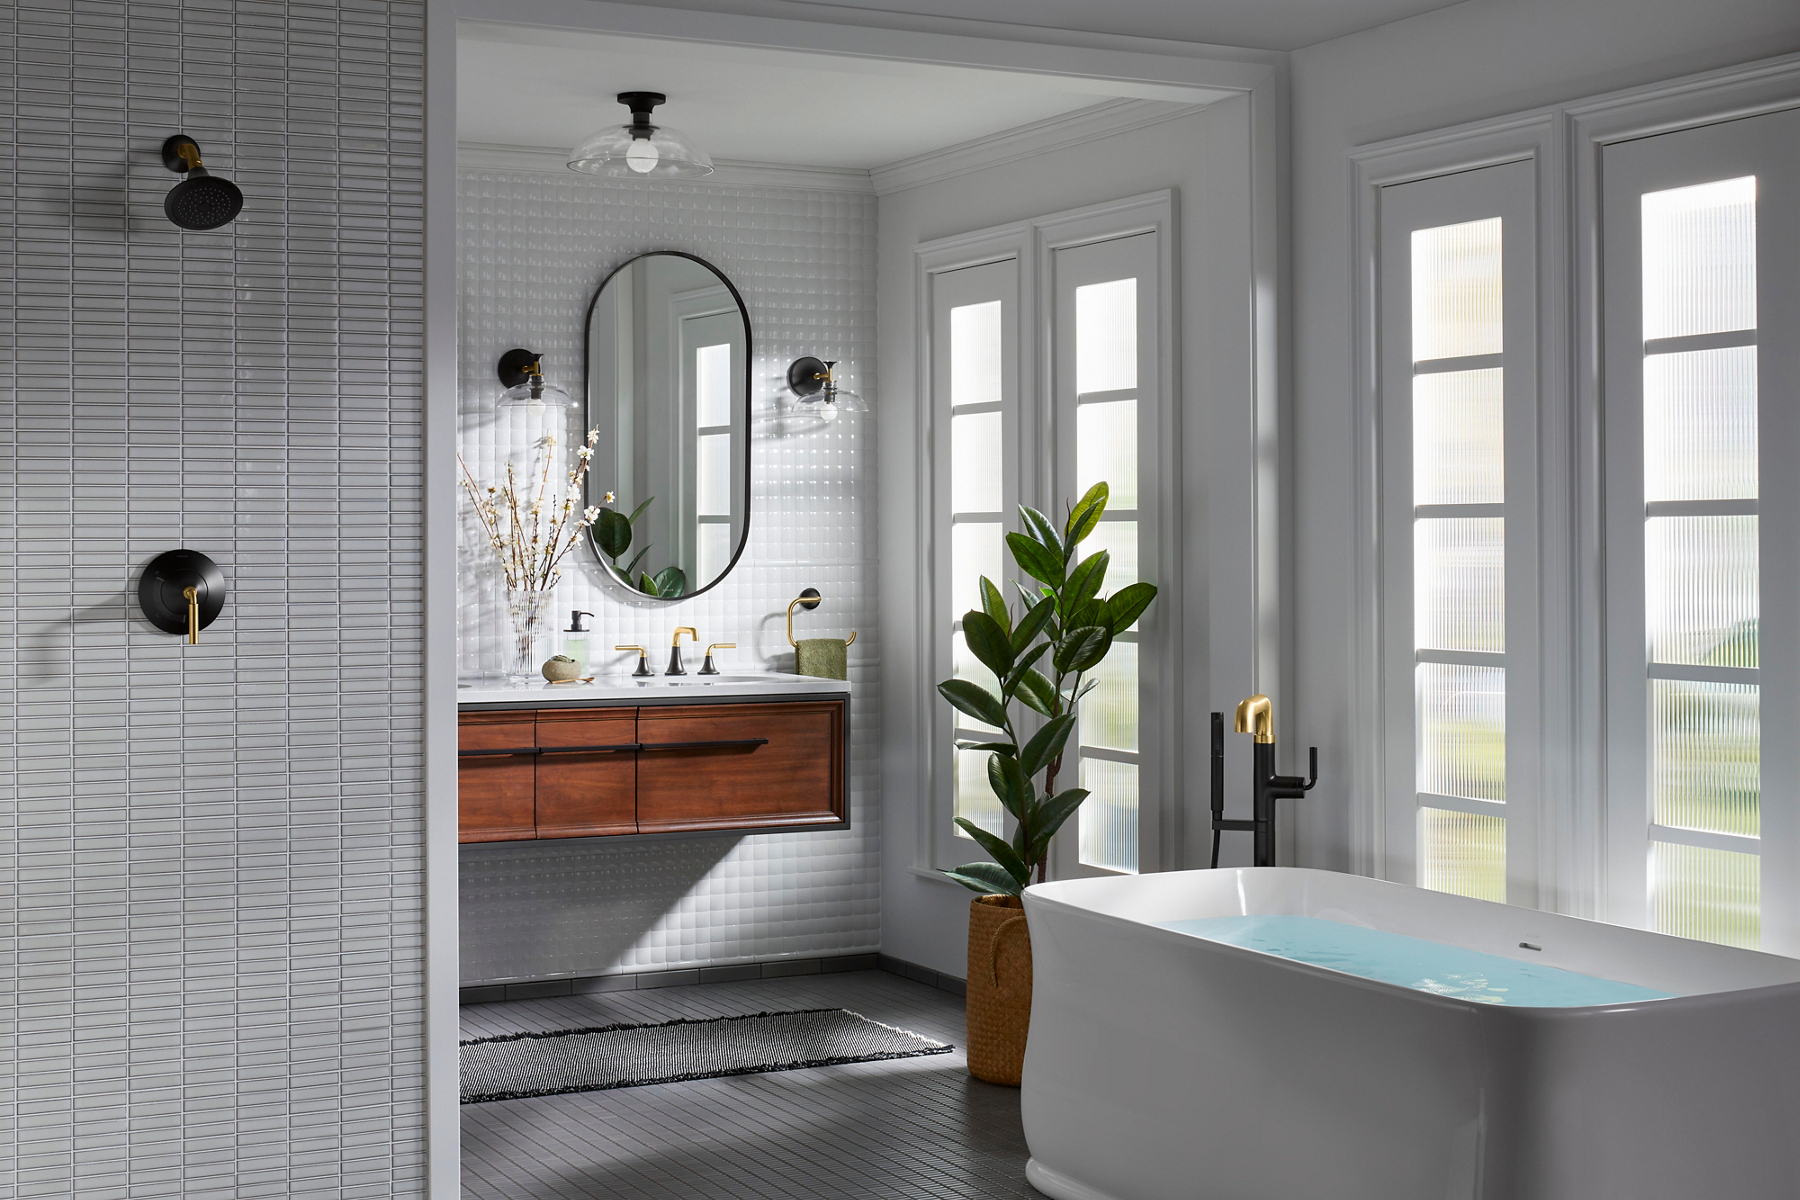 A KOHLER white freestanding bath full of water and ready for a soak in a light and bright bathroom with white tiled shower, wall hung vanity, and capsule mirrors.